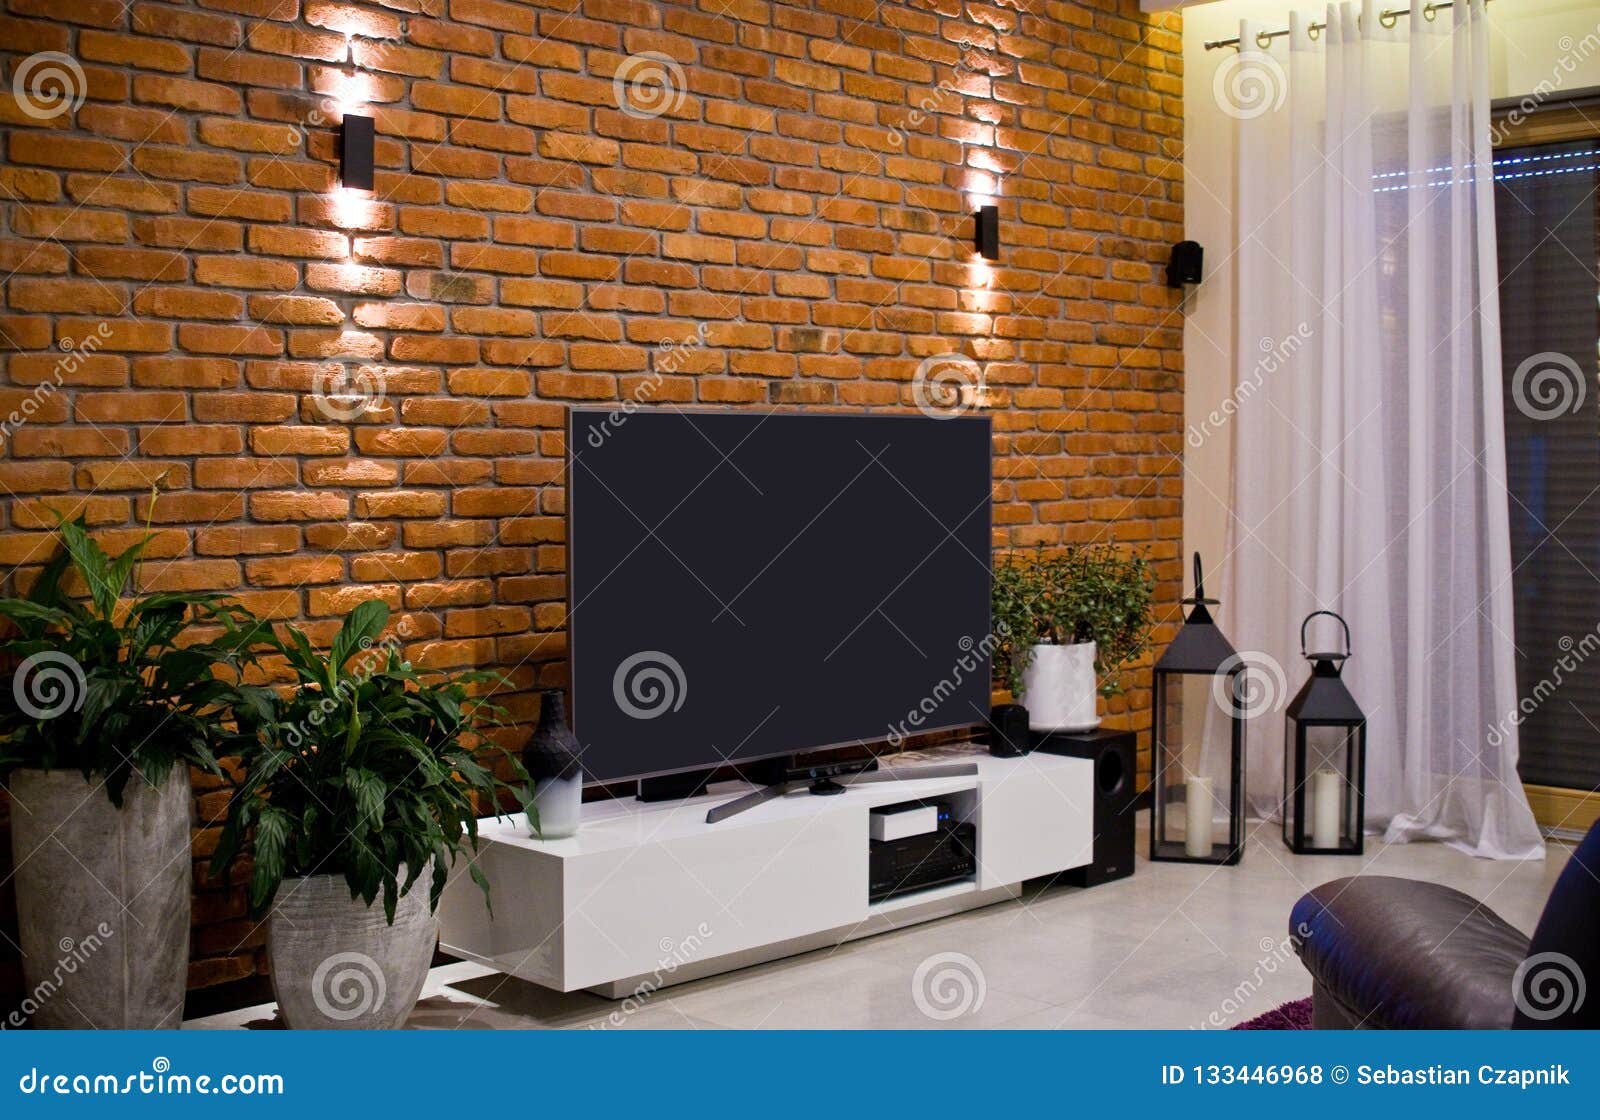 Modern Home Room Design with Red Brick Wall and Flat Led ...